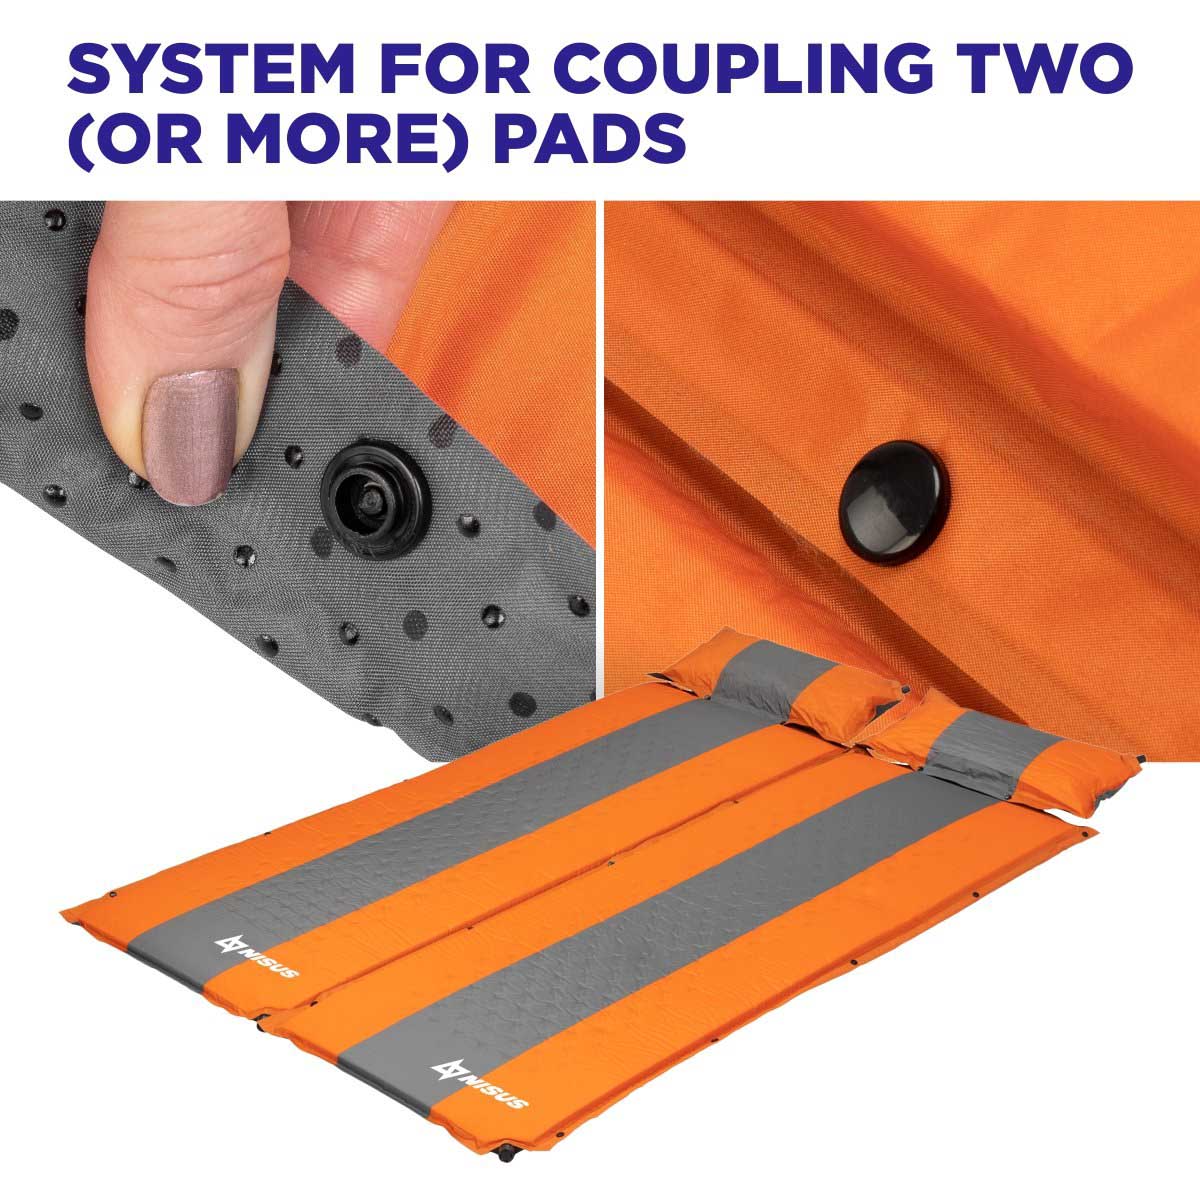 Orange Self Inflating Sleeping Pads could be easily connected one after each other with a clip to make a big pad for two